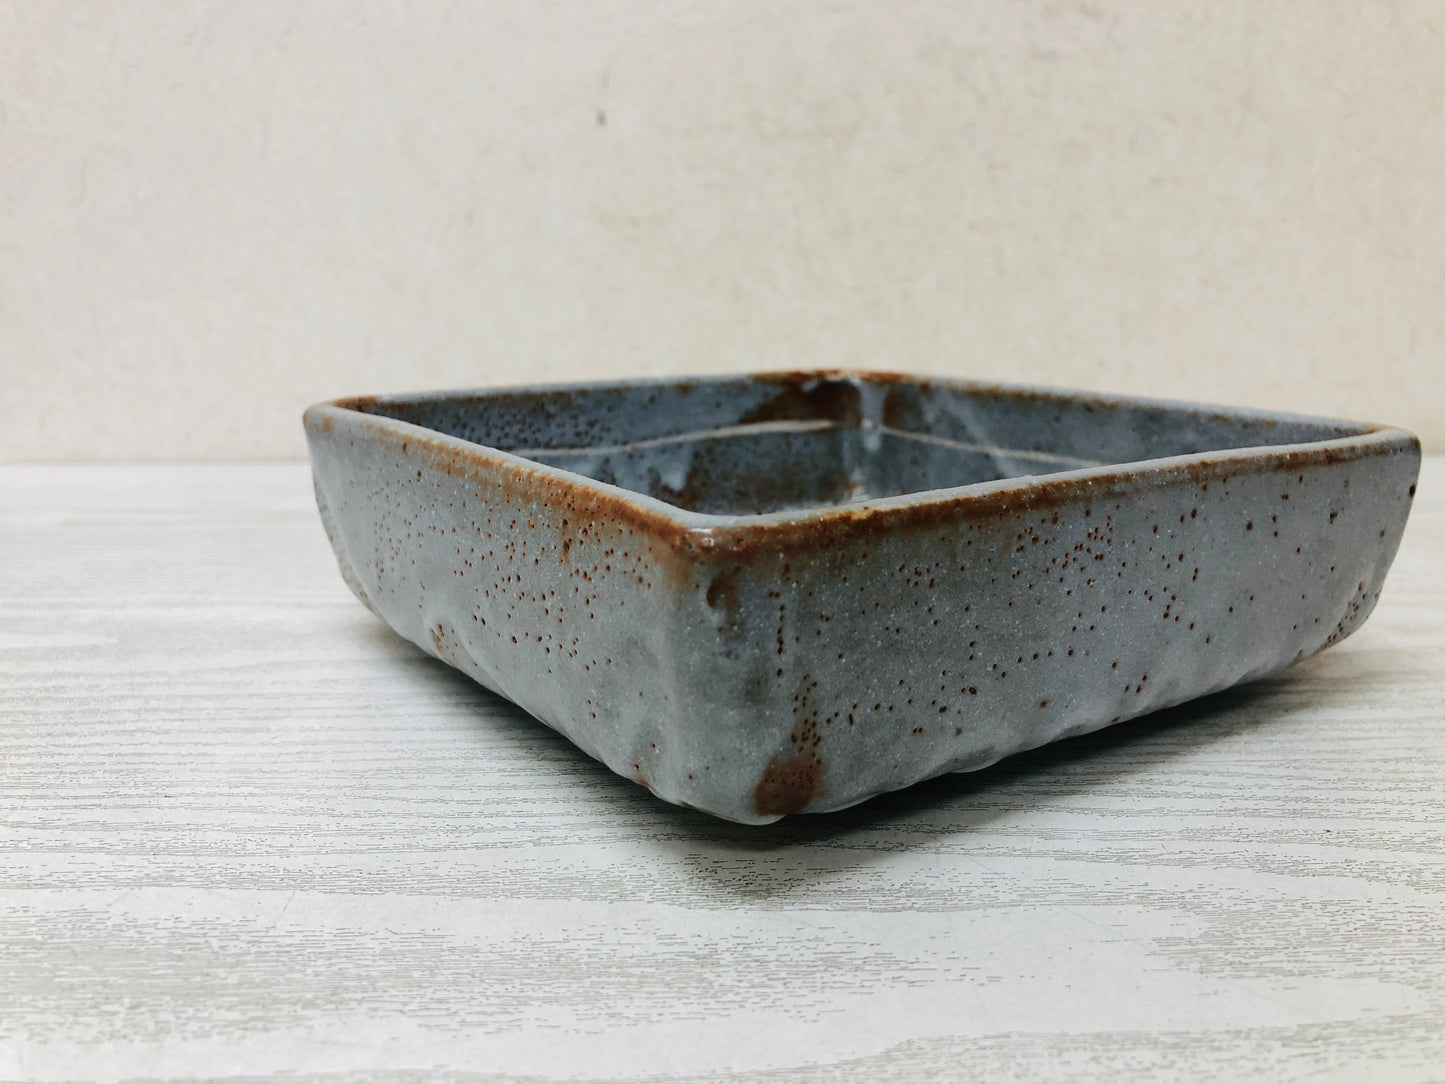 Y2903 CHAWAN Shino-ware Confectionery Candy Bowl signed box square Japan antique